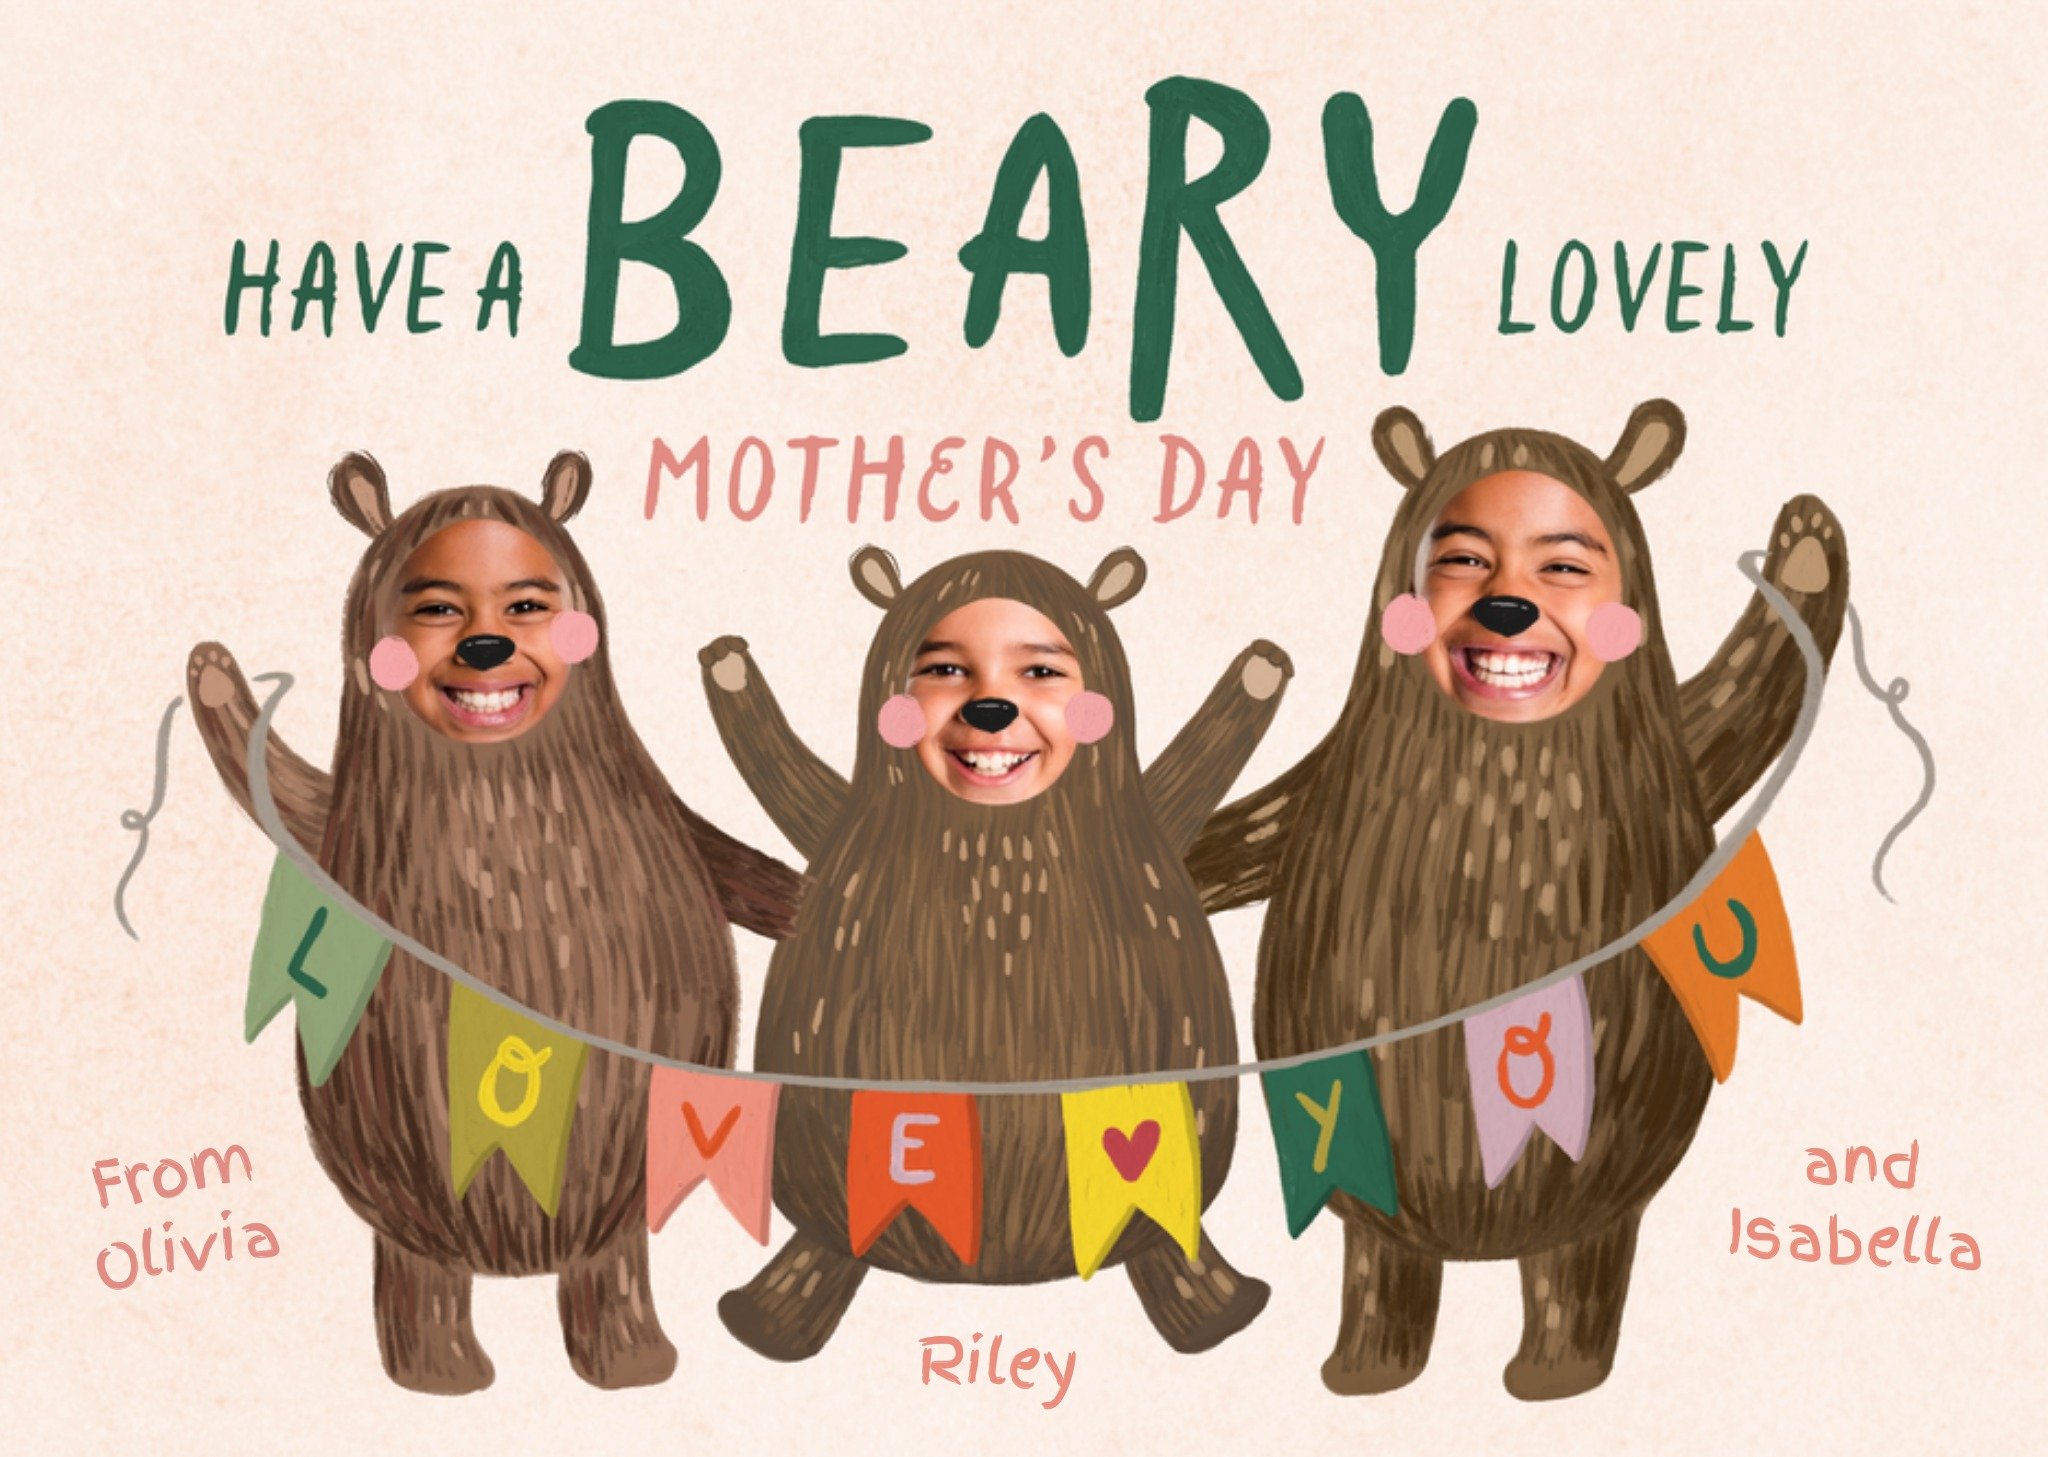 Moonpig Three Bear Cubs Face In Hole Photo Upload Beary Lovely Mother's Day Card Ecard